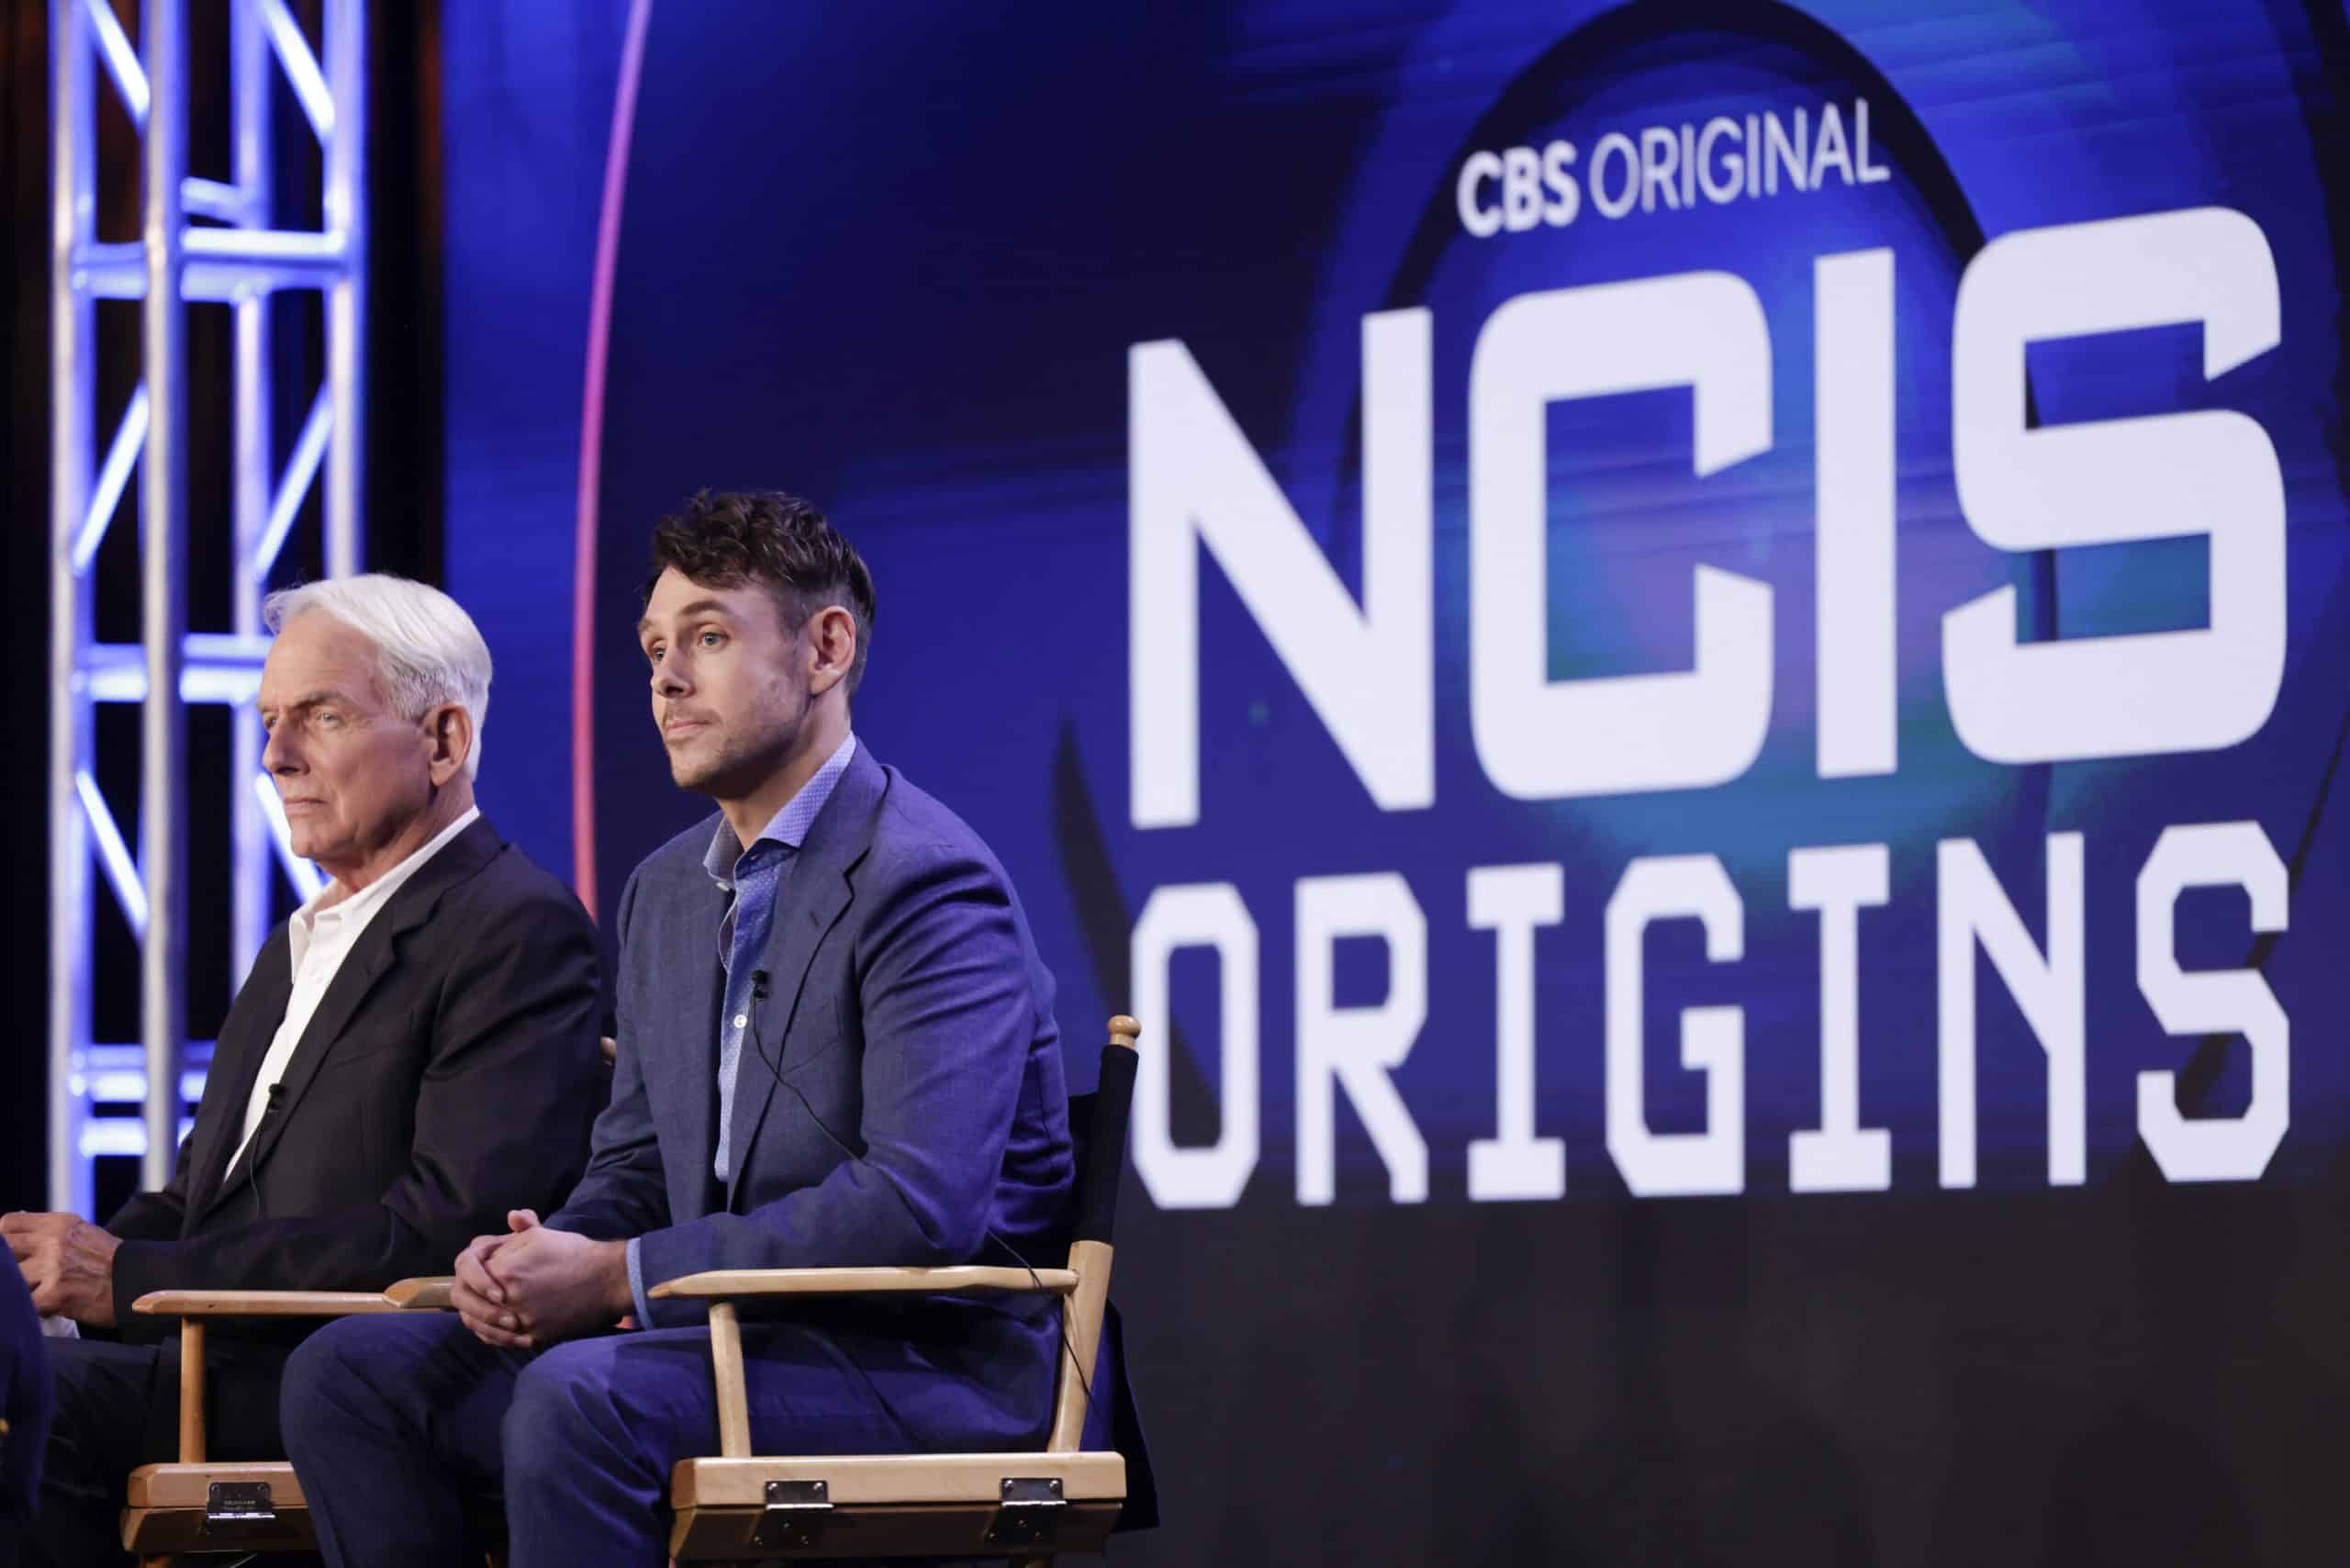 (L-R) Mark Harmon, Executive Producer and Narrator and Shawn Harmon, Executive Producer of the CBS series NCIS: Origins at the TCA SUMMER PRESS TOUR 2024 on Saturday, July 13, 2024 at the Langham Huntington Hotel in Pasadena, CA. Photo: Francis Specker/CBS ©2024 CBS Broadcasting, Inc. All Rights Reserved